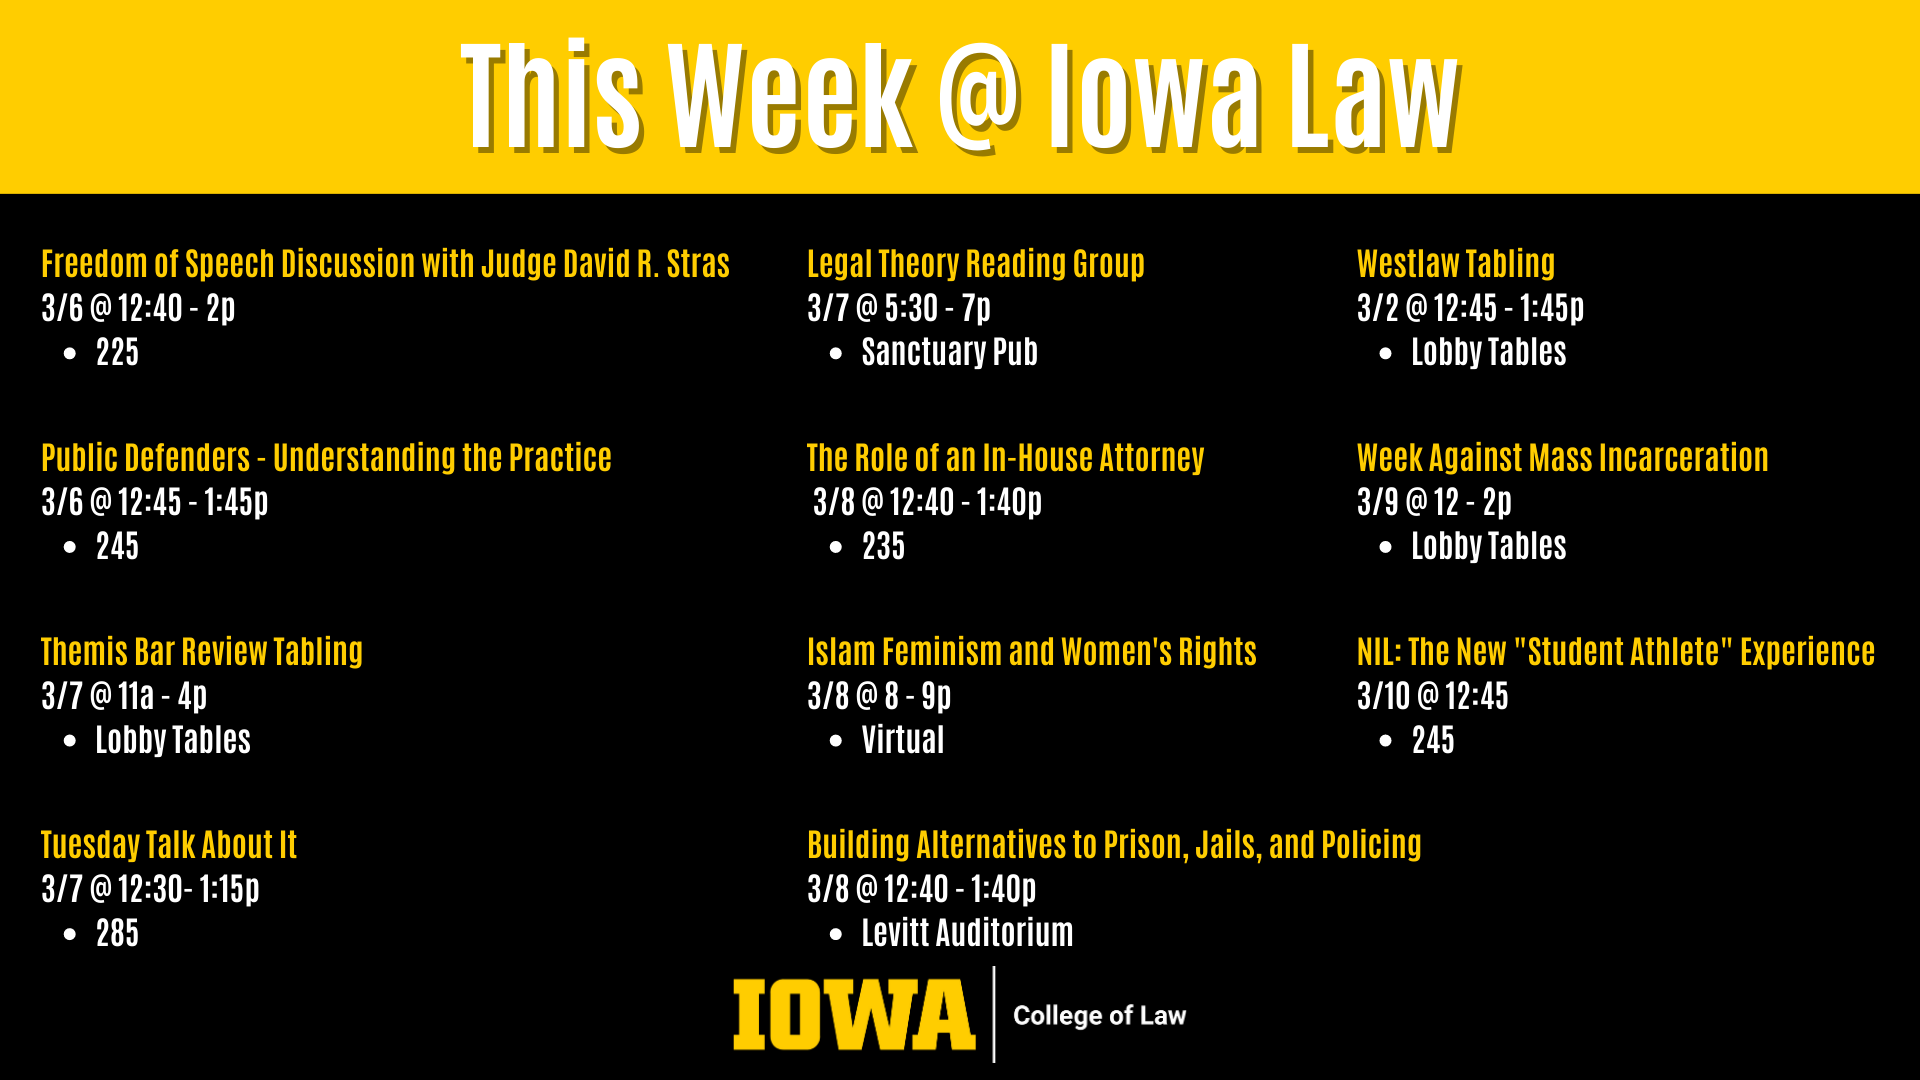 This Week @ Iowa Law Public Defenders - Understanding the Practice  3/6 @ 12:45 - 1:45p  245 Legal Theory Reading Group 3/7 @ 5:30 - 7p  Sanctuary Pub Westlaw Tabling  3/2 @ 12:45 - 1:45p  Lobby Tables Tuesday Talk About It 3/7 @ 12:30- 1:15p  285 Themis Bar Review Tabling 3/7 @ 11a - 4p  Lobby Tables The Role of an In-House Attorney  3/8 @ 12:40 - 1:40p  235 Freedom of Speech Discussion with Judge David R. Stras 3/6 @ 12:40 - 2p  225 Islam Feminism and Women's Rights  3/8 @ 8 - 9p  Virtual Week Against Mass Incarceration  3/9 @ 12 - 2p  Lobby Tables NIL: The New "Student Athlete" Experience  3/10 @ 12:45 245 Building Alternatives to Prison, Jails, and Policing 3/8 @ 12:40 - 1:40p Levitt Auditorium